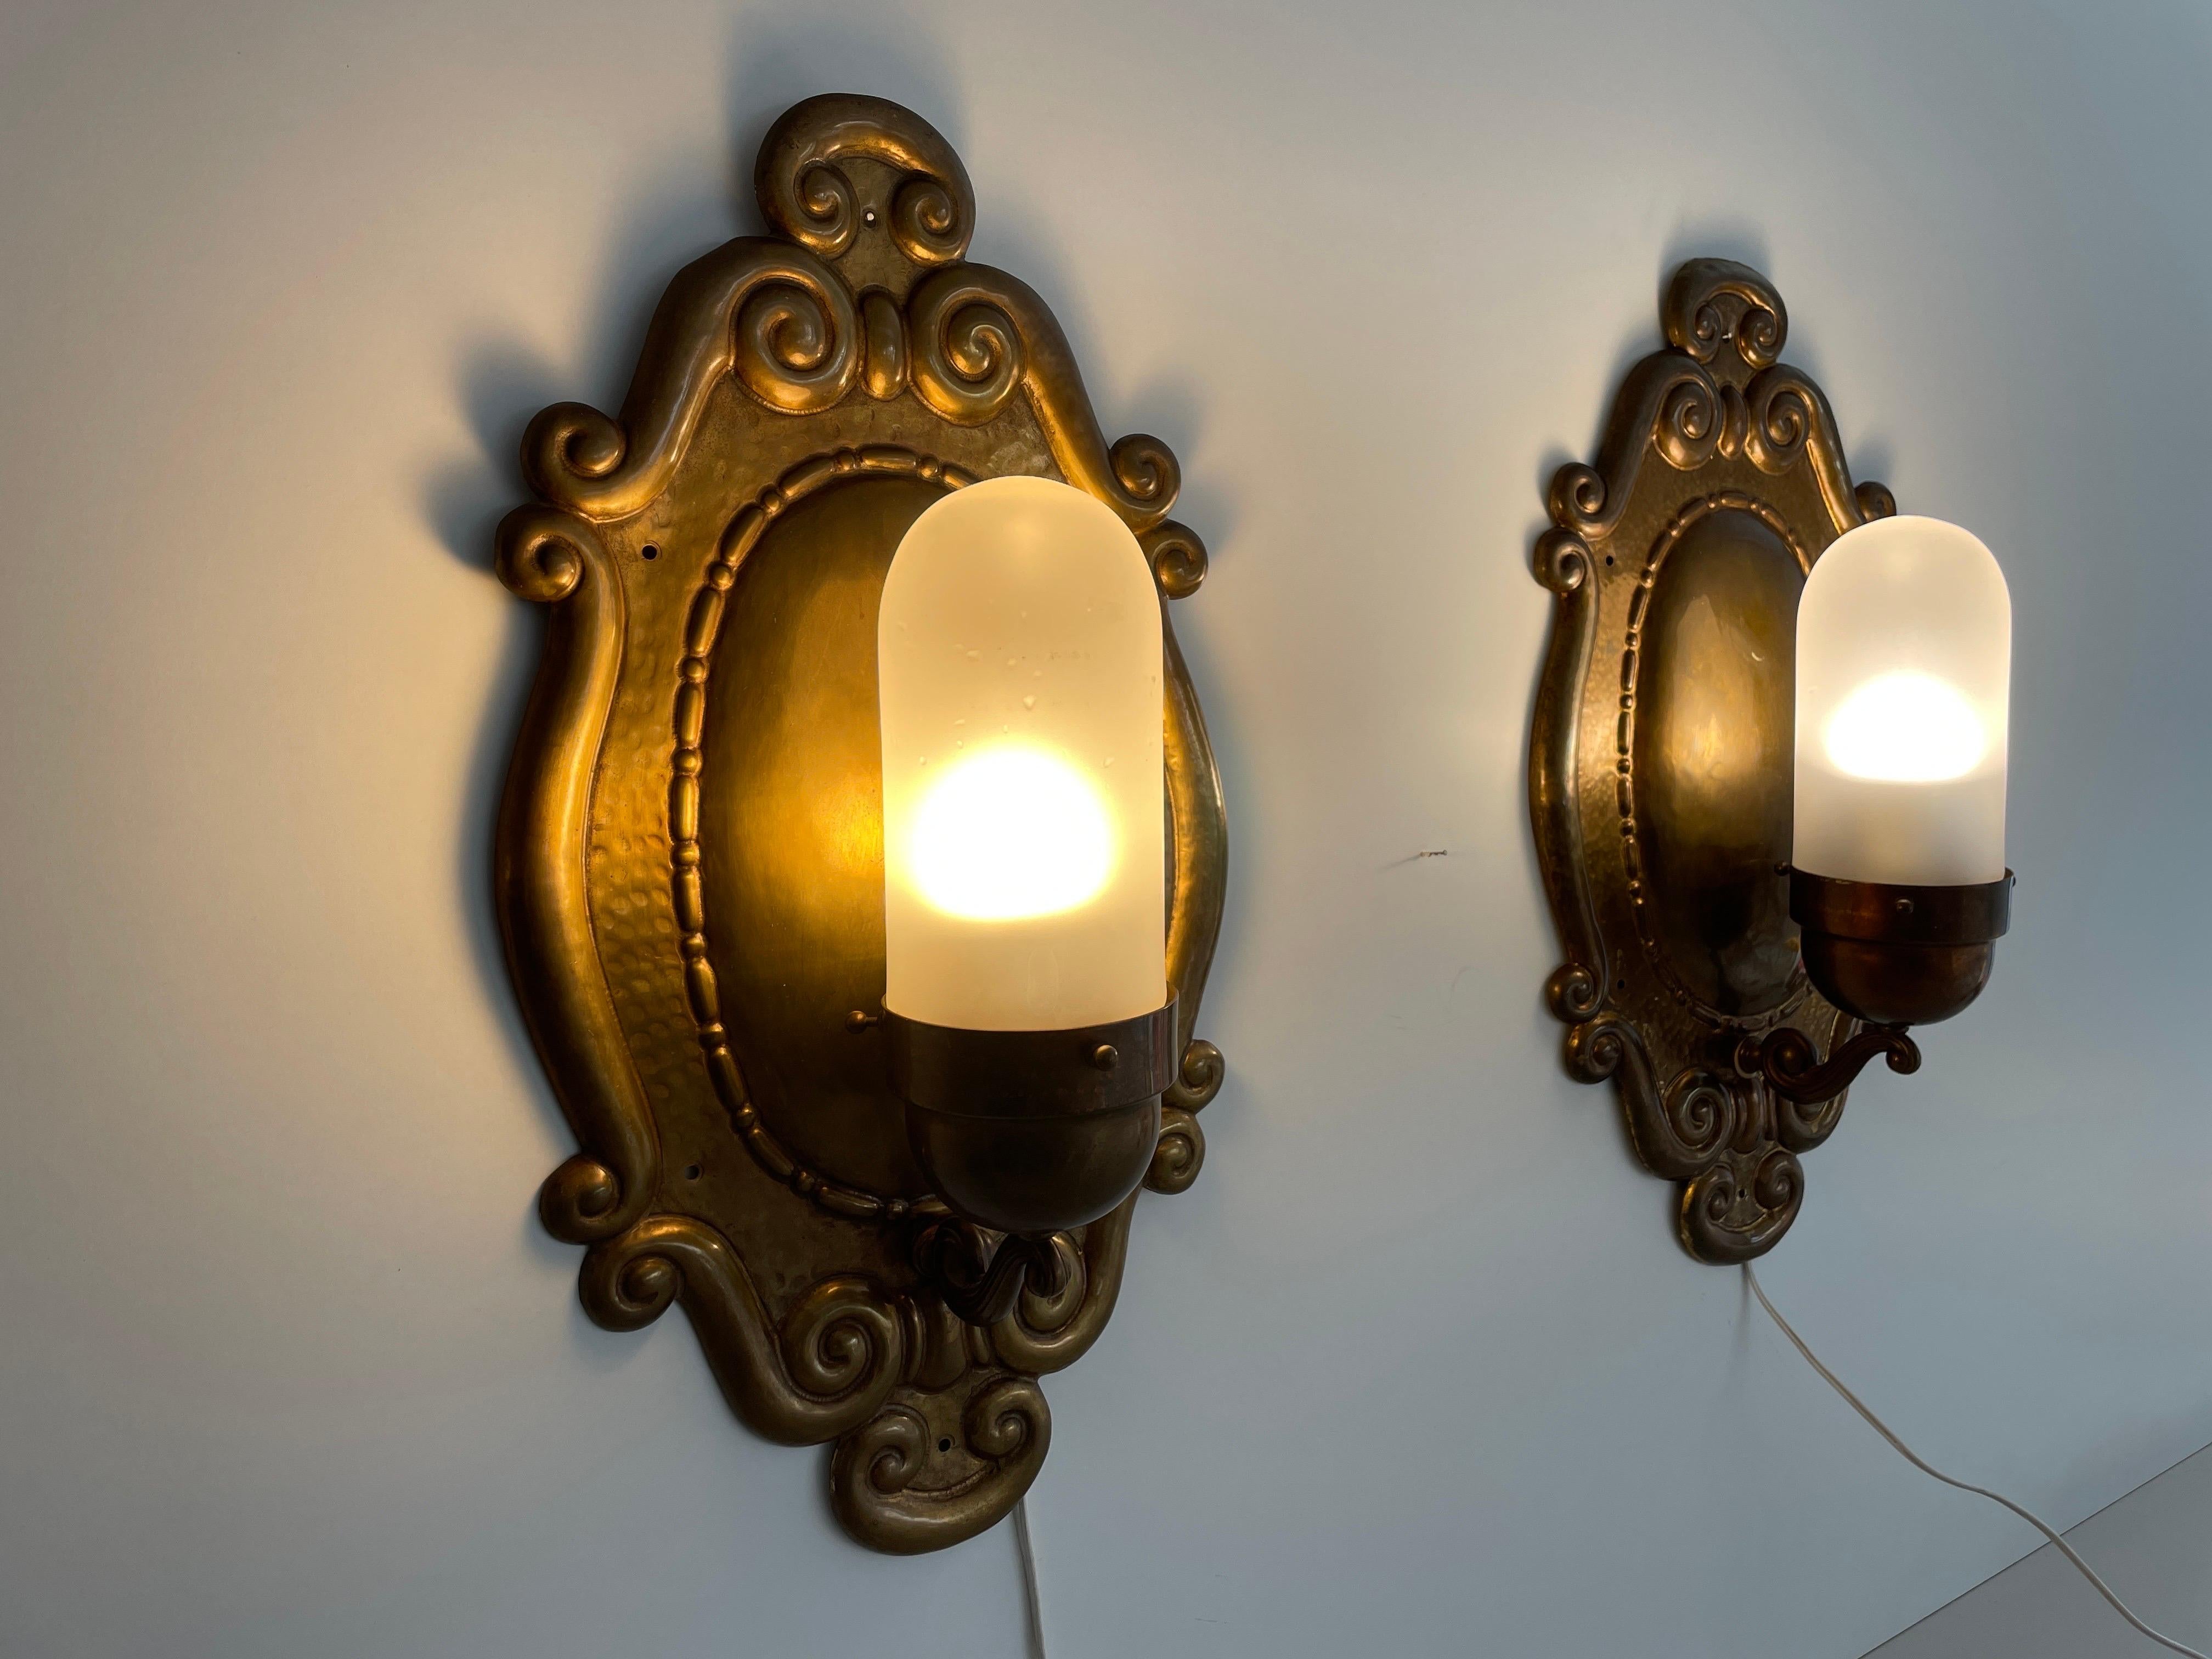 Exceptional Art Deco Glass and Copper Body Pair of Sconces, 1940s, Germany For Sale 7